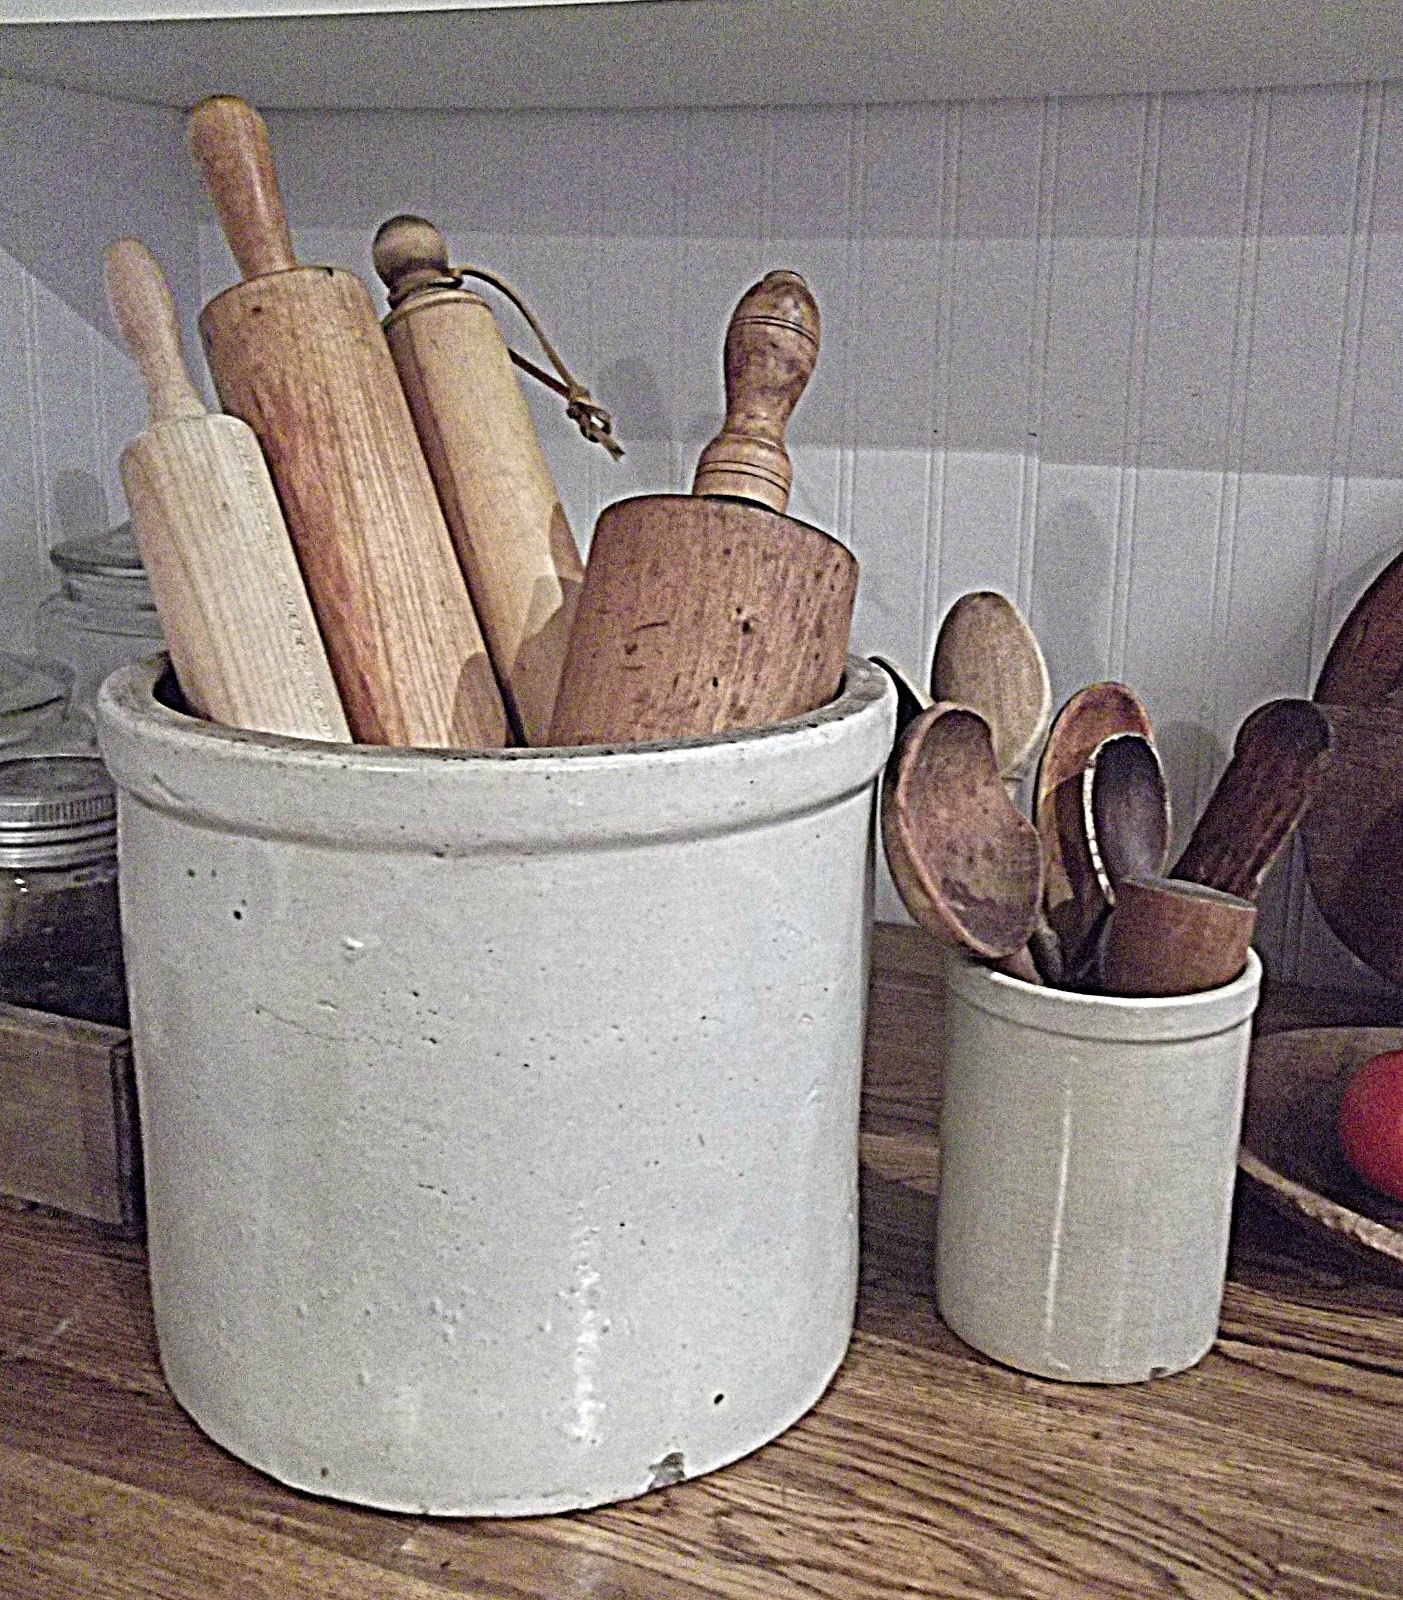 Rustic farmhouse love the old pins and spoons